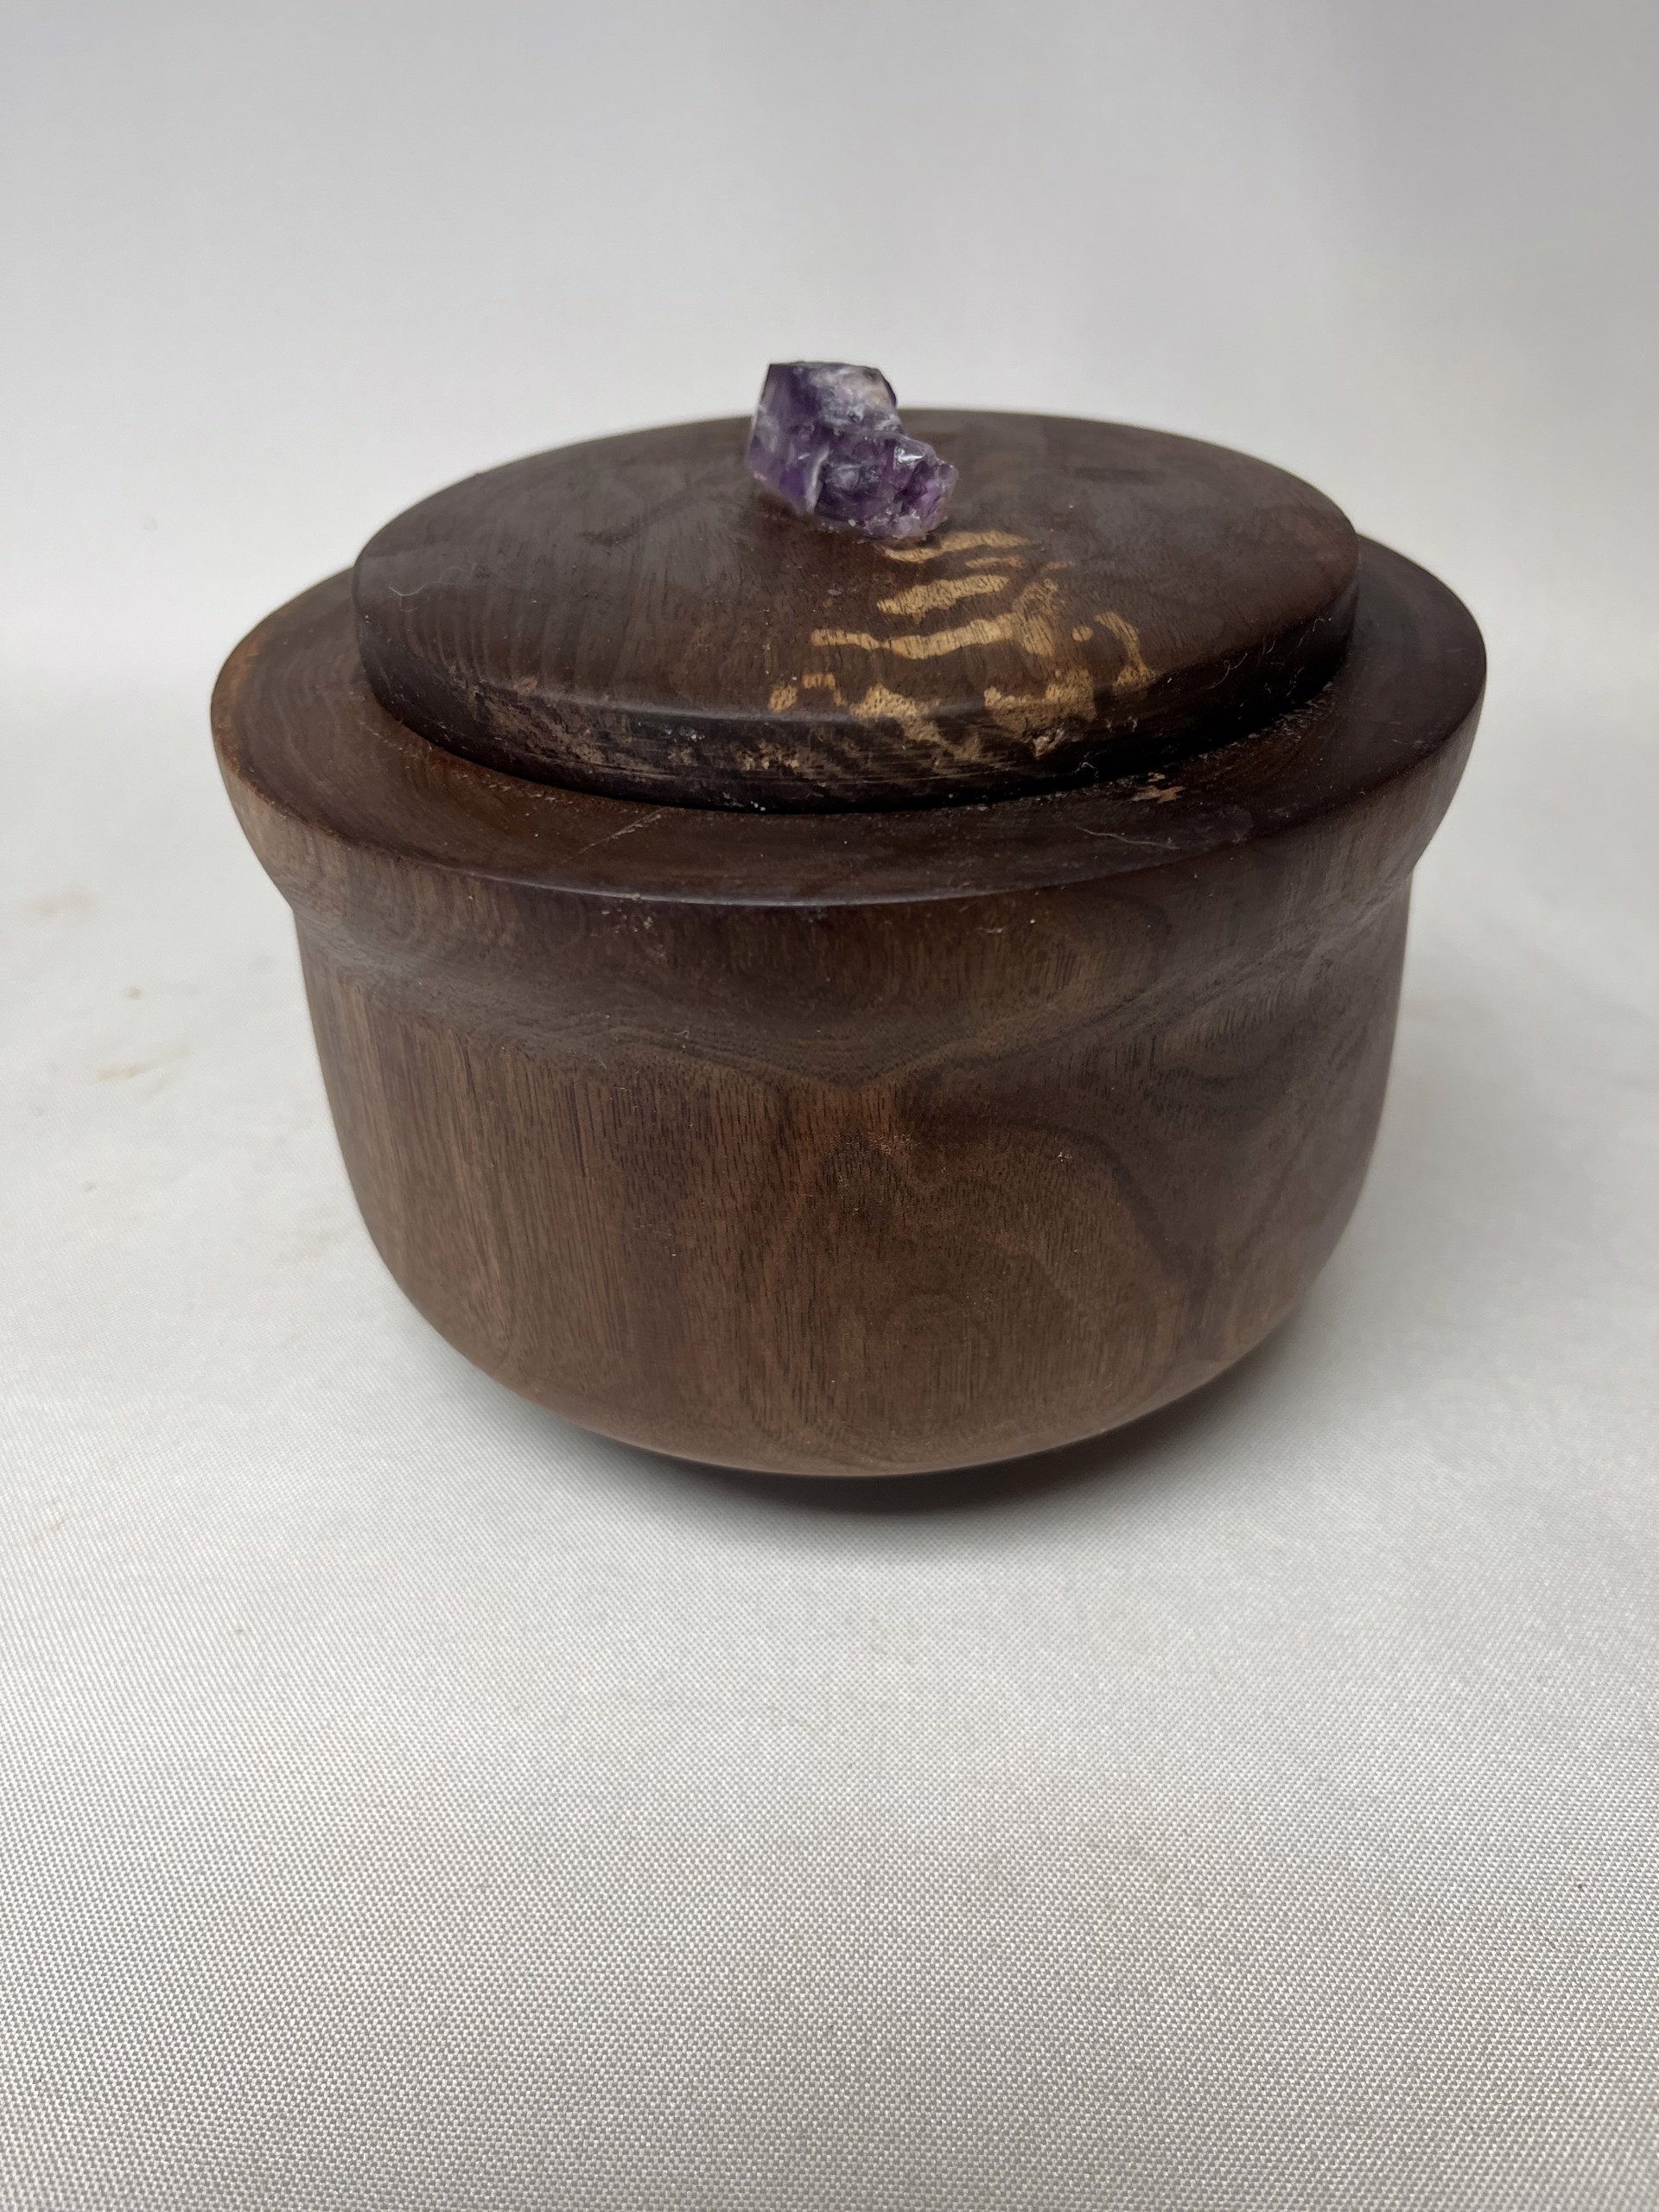 Turned Wood Jar W/Lid #22-41 by Rick Squires